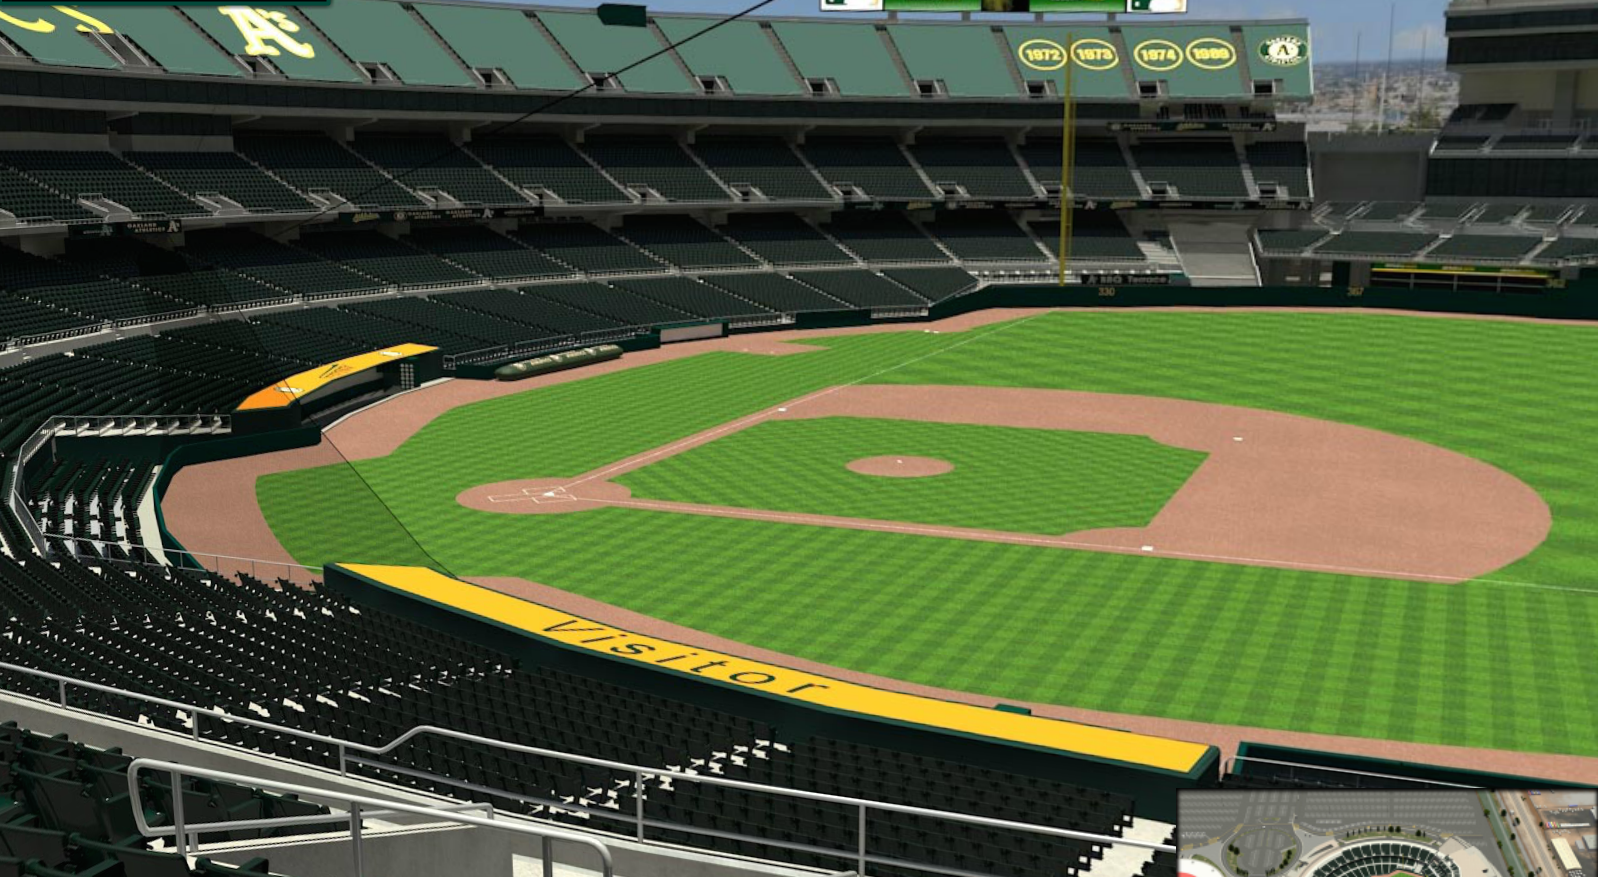 Lawsuit Asks Major League Baseball To Put Up Safety Nets All The Way To